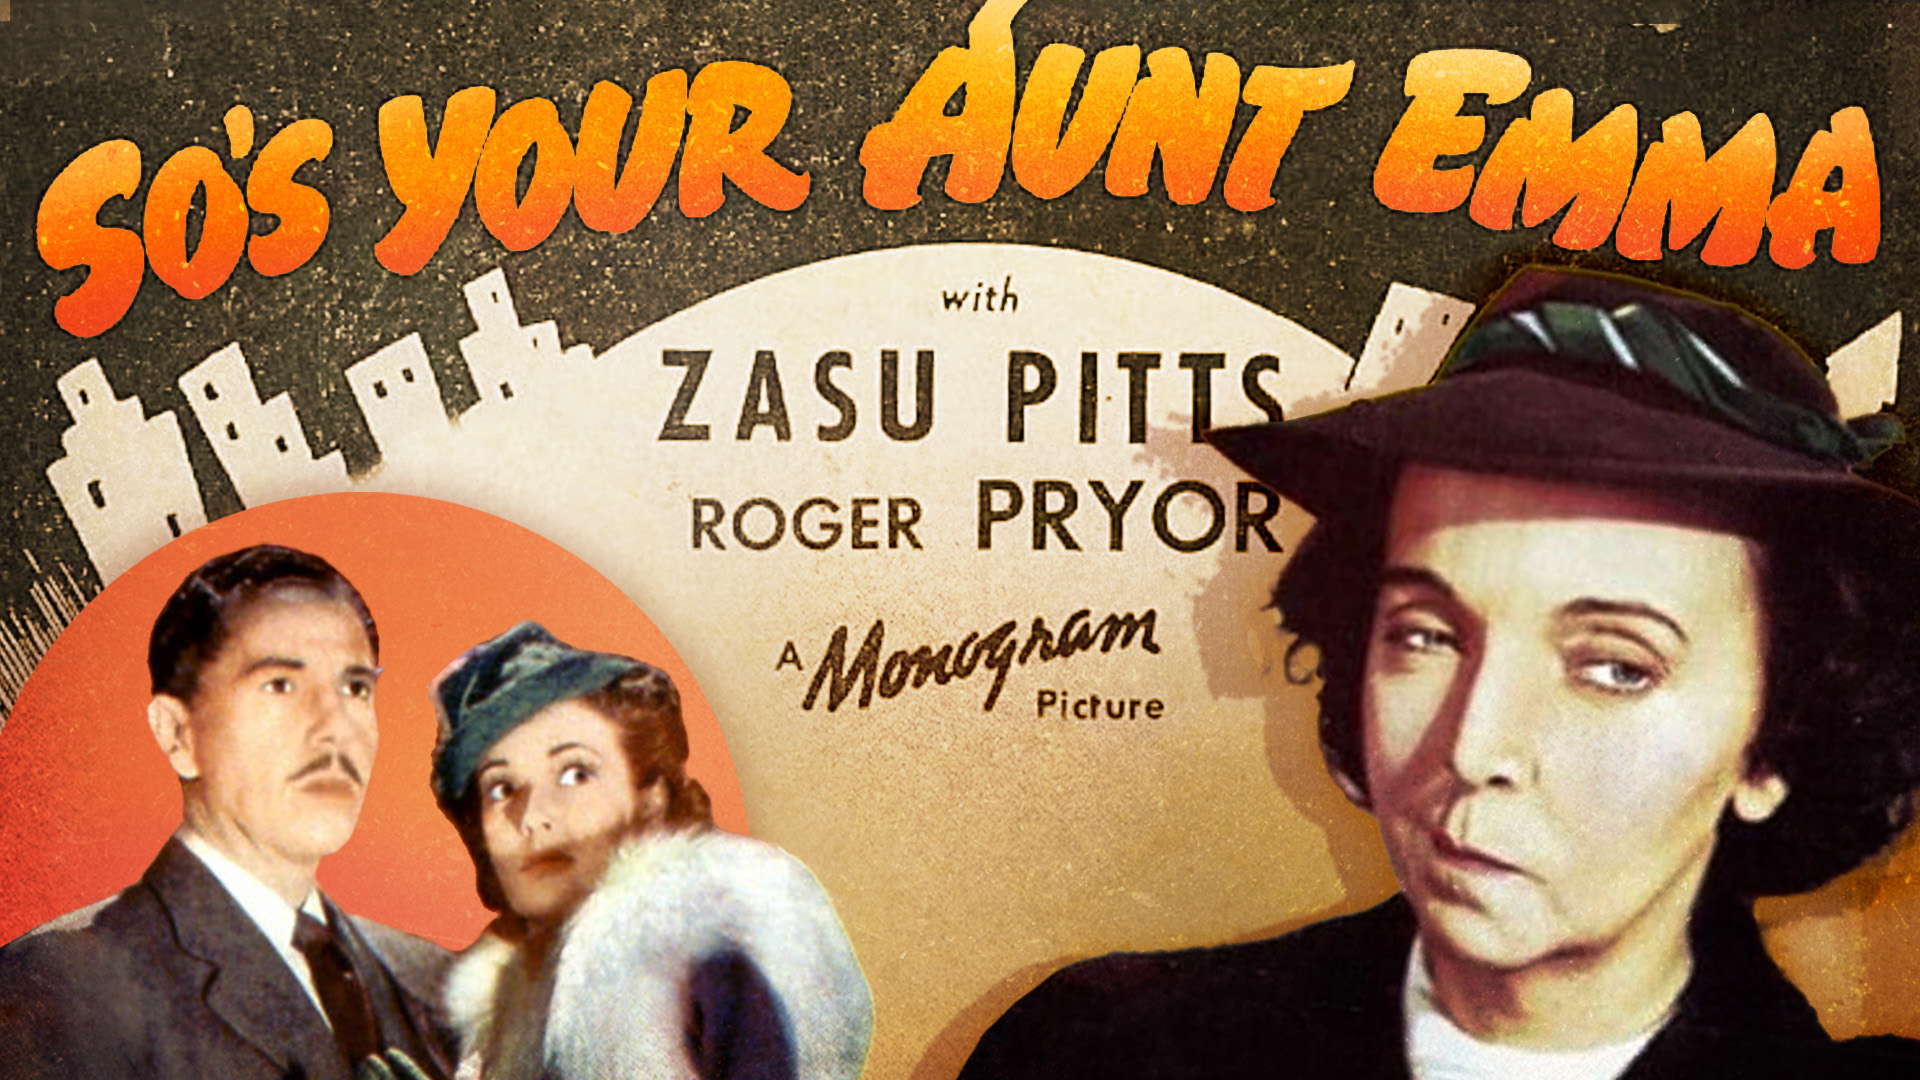 So S Your Aunt Emma 1942 Ntd